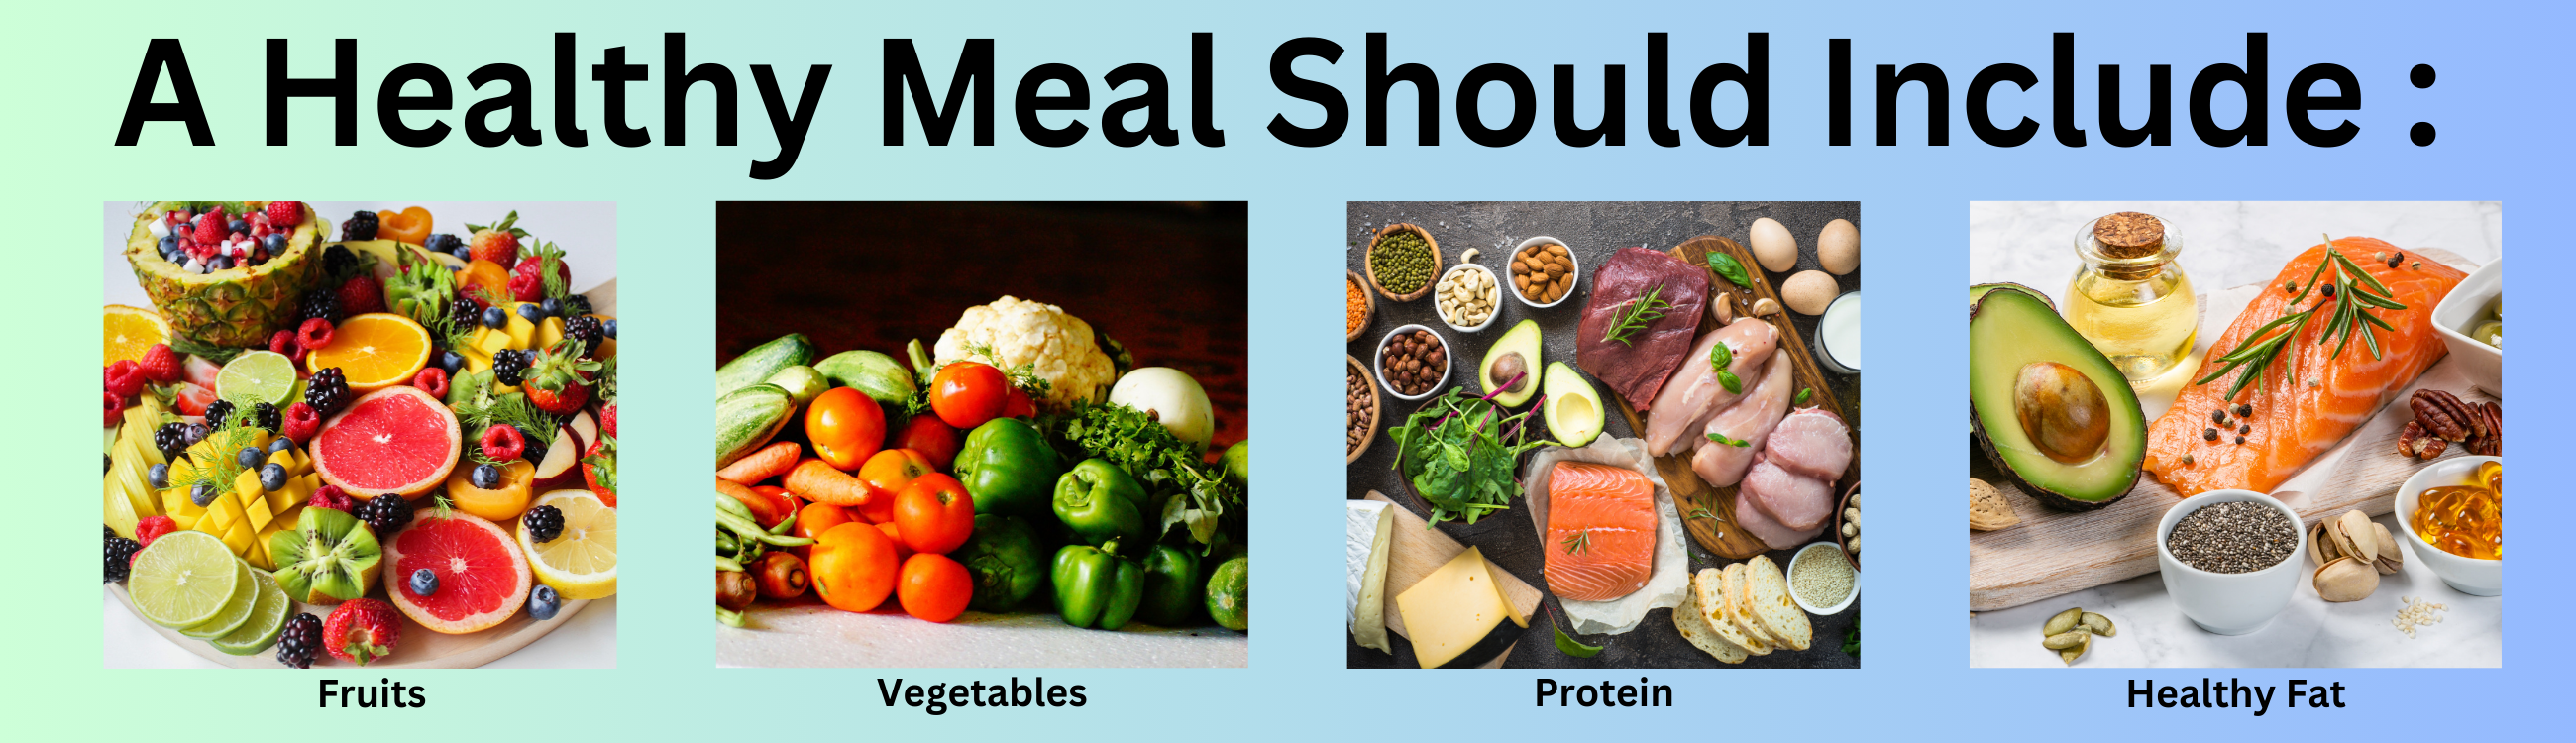 Ingredients of a health meal to eat daily covers fruits, vegetables, protein rich food and healthy fat food items.